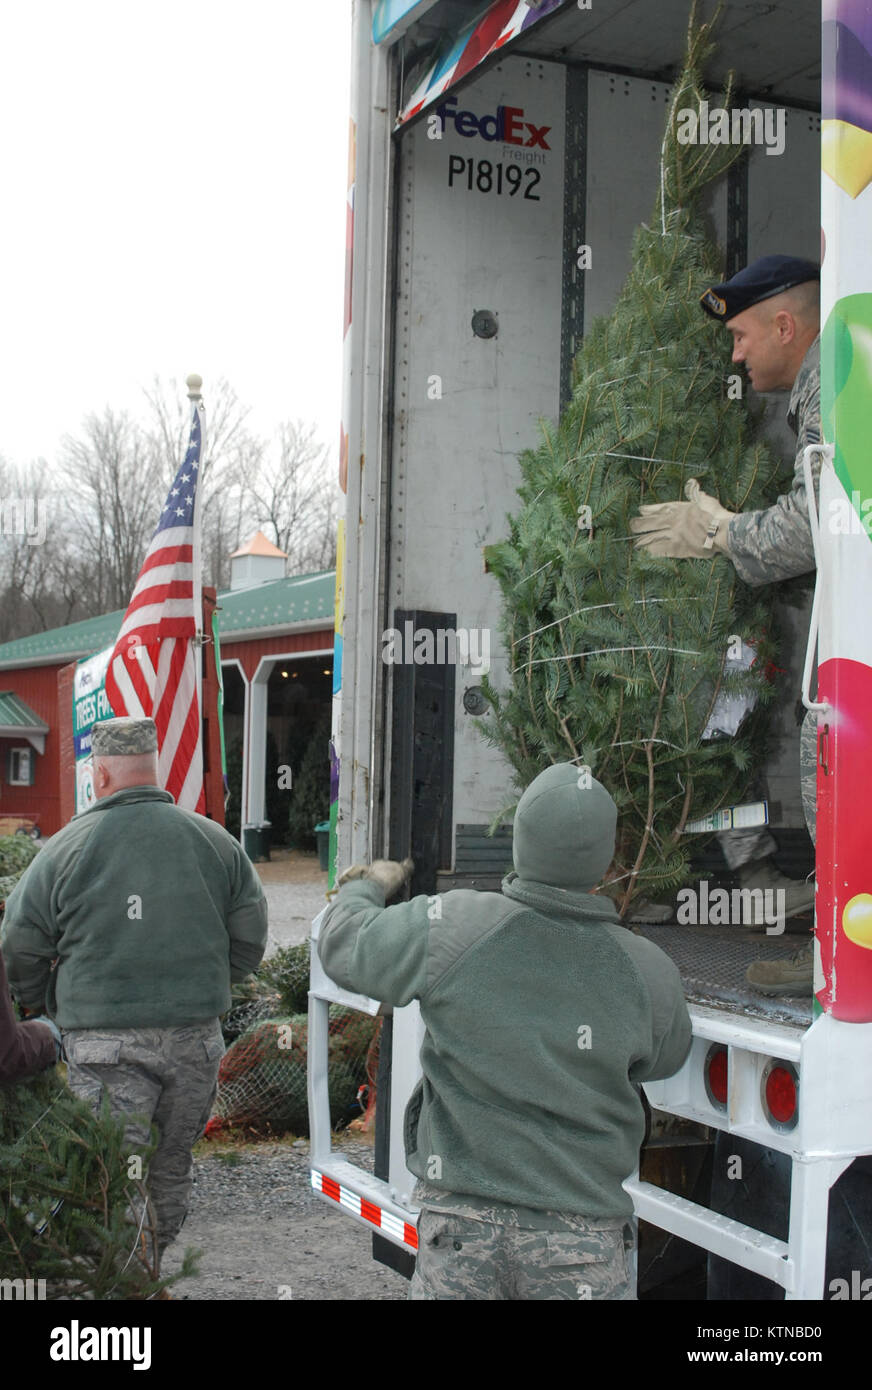 BALLSTON SPA, N.Y. -- New York Air National Guard members of the 109th Airlift Wing from Scotia, N.Y. volunteer their time to assist FedEx driver Don Pelletier load Christmas Trees here at Ellms Christmas Tree Farm Dec. 7. Nearly 20 Airmen volunteered to assist in the annual &quot;Trees for Troops&quot; loading of about 150 donated trees bound for military installations and families around the country and the globe. U.S. Army photo by Col. Richard Goldenberg, New York Army National Guard. (RELEASED) Stock Photo